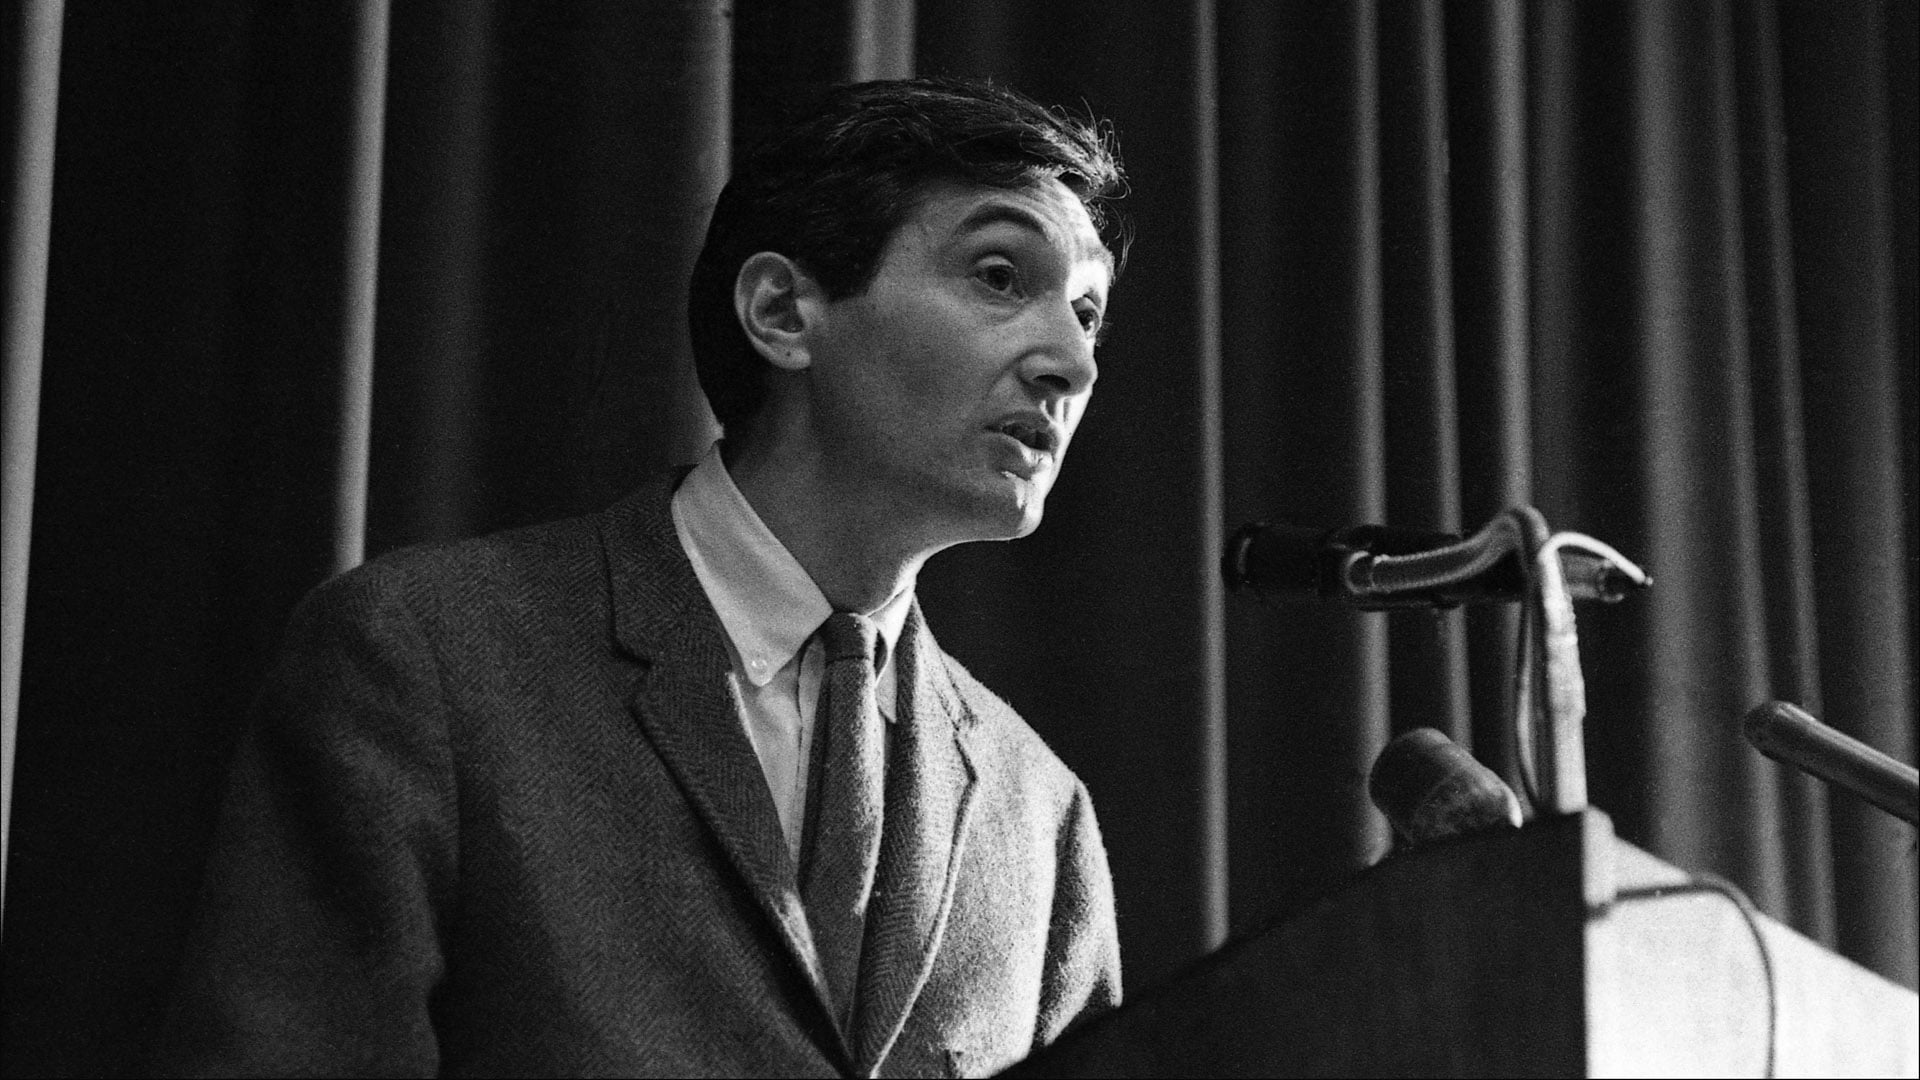 Howard Zinn: You Can't Be Neutral on a Moving Train (2004)